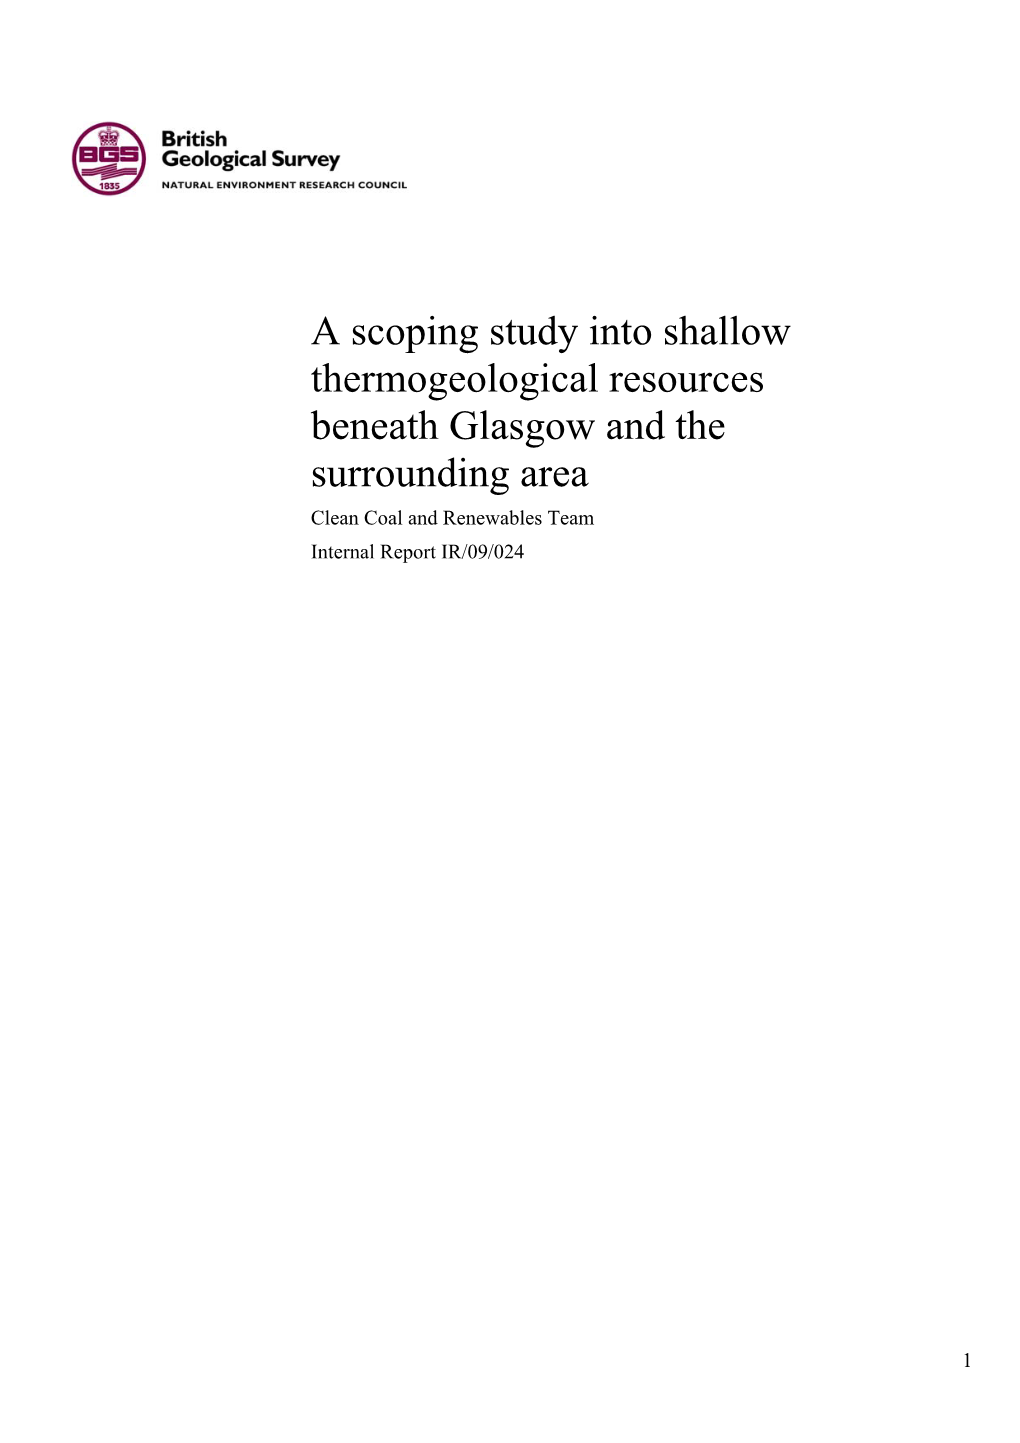 A Scoping Study Into Shallow Thermogeological Resources Beneath Glasgow and the Surrounding Area Clean Coal and Renewables Team Internal Report IR/09/024